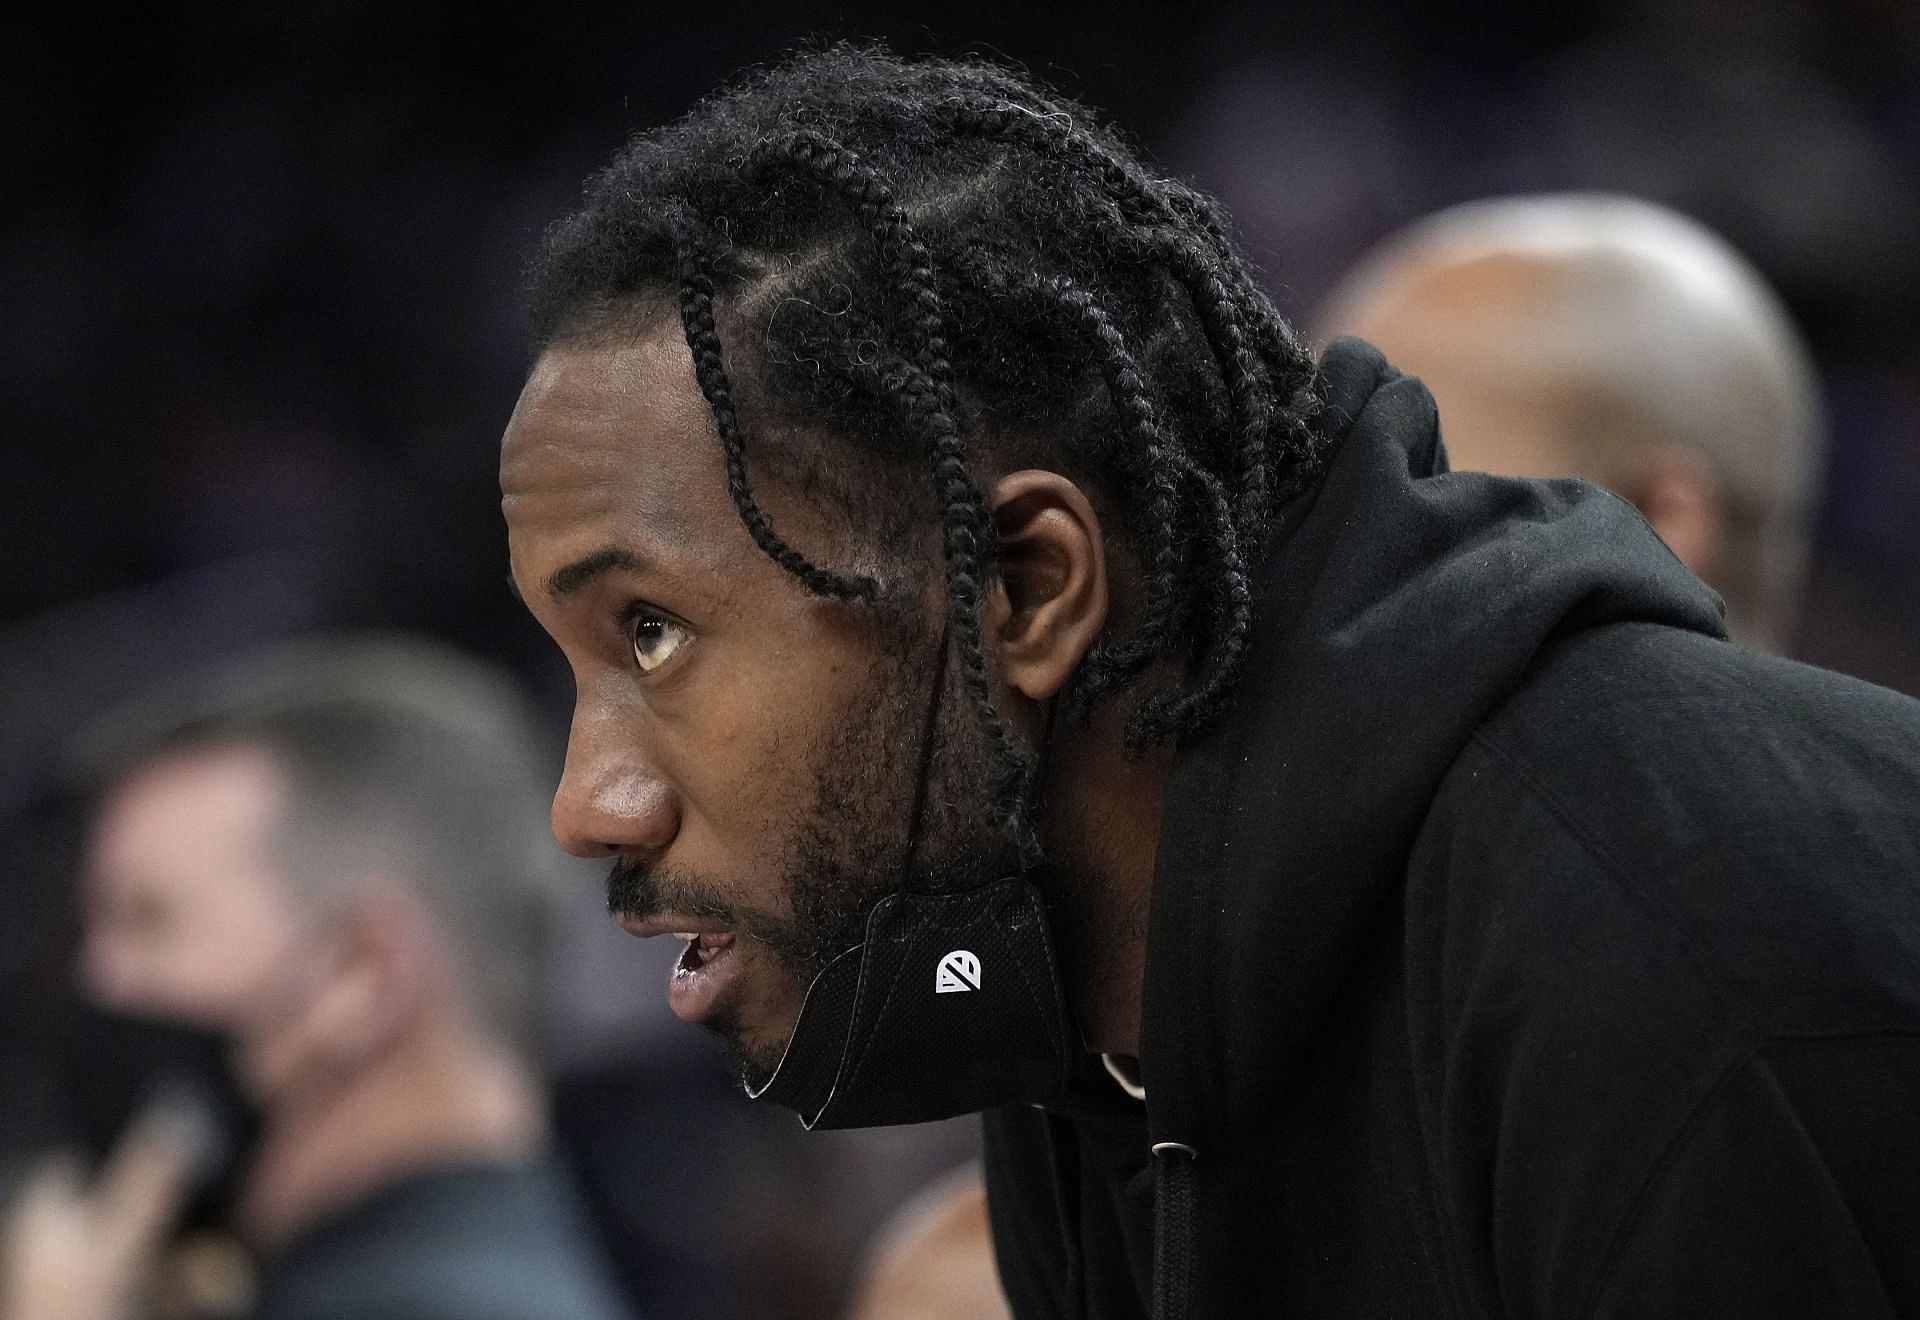 Los Angeles Clippers superstar Kawhi Leonard is yet to play this season